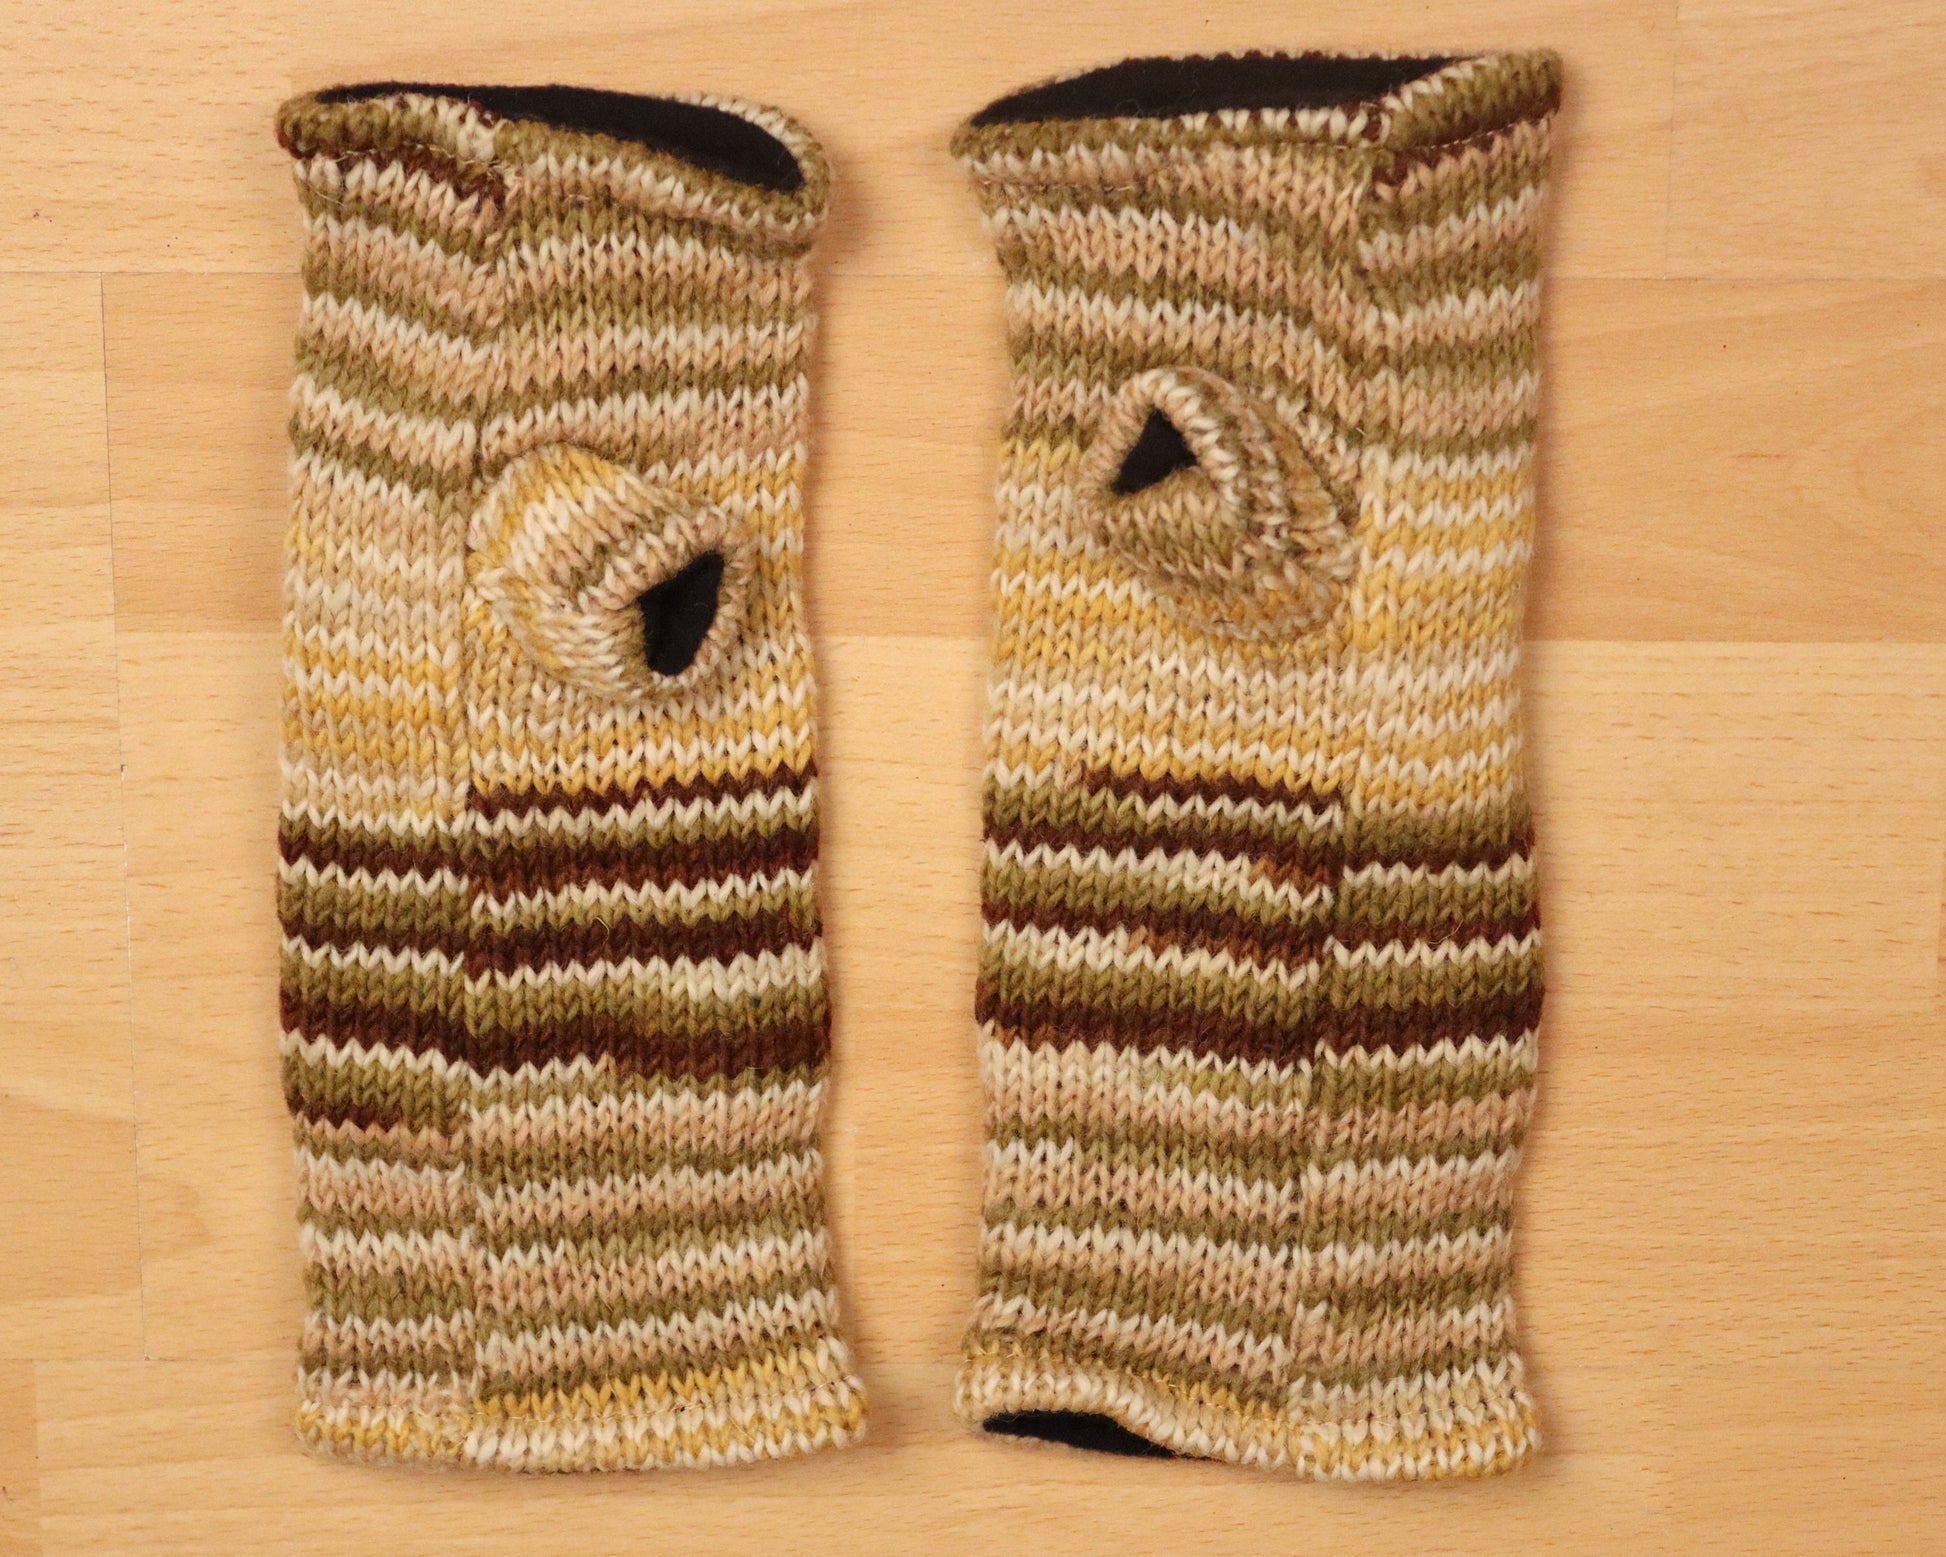 Fleece Lined Knitted Wrist Warmers - Cream and Brown Striped - Bare Canvas